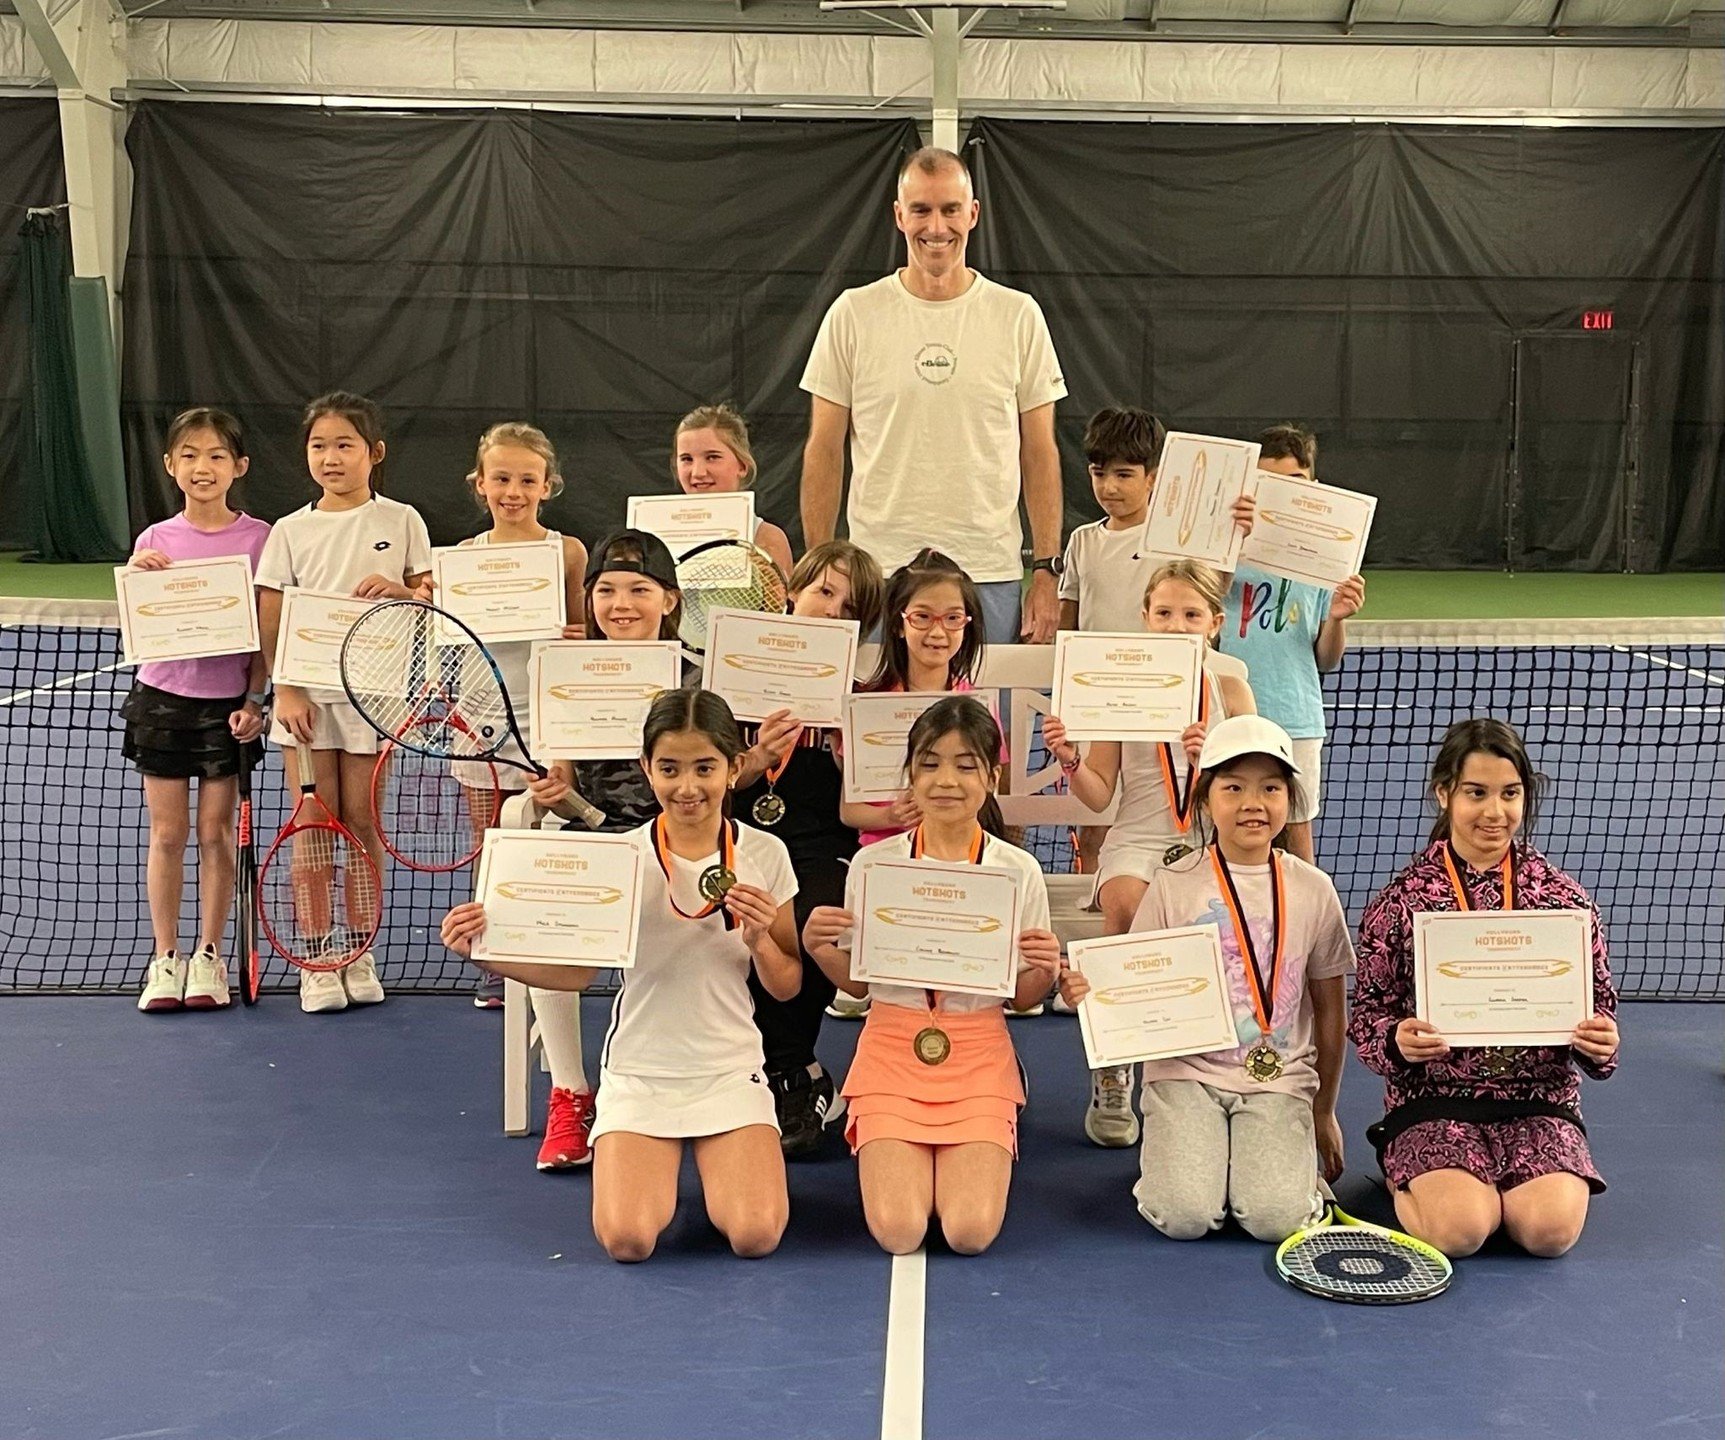 Our very first &lsquo;Hotshots: Part Deux&rsquo; doubles tournament for our junior tennis players. A learning experience in a fun &amp; encouraging environment!
.
.
#hotshots #tenniscanada #tennispro #hollyburncountryclub #HCC #Countryclub #athleticc